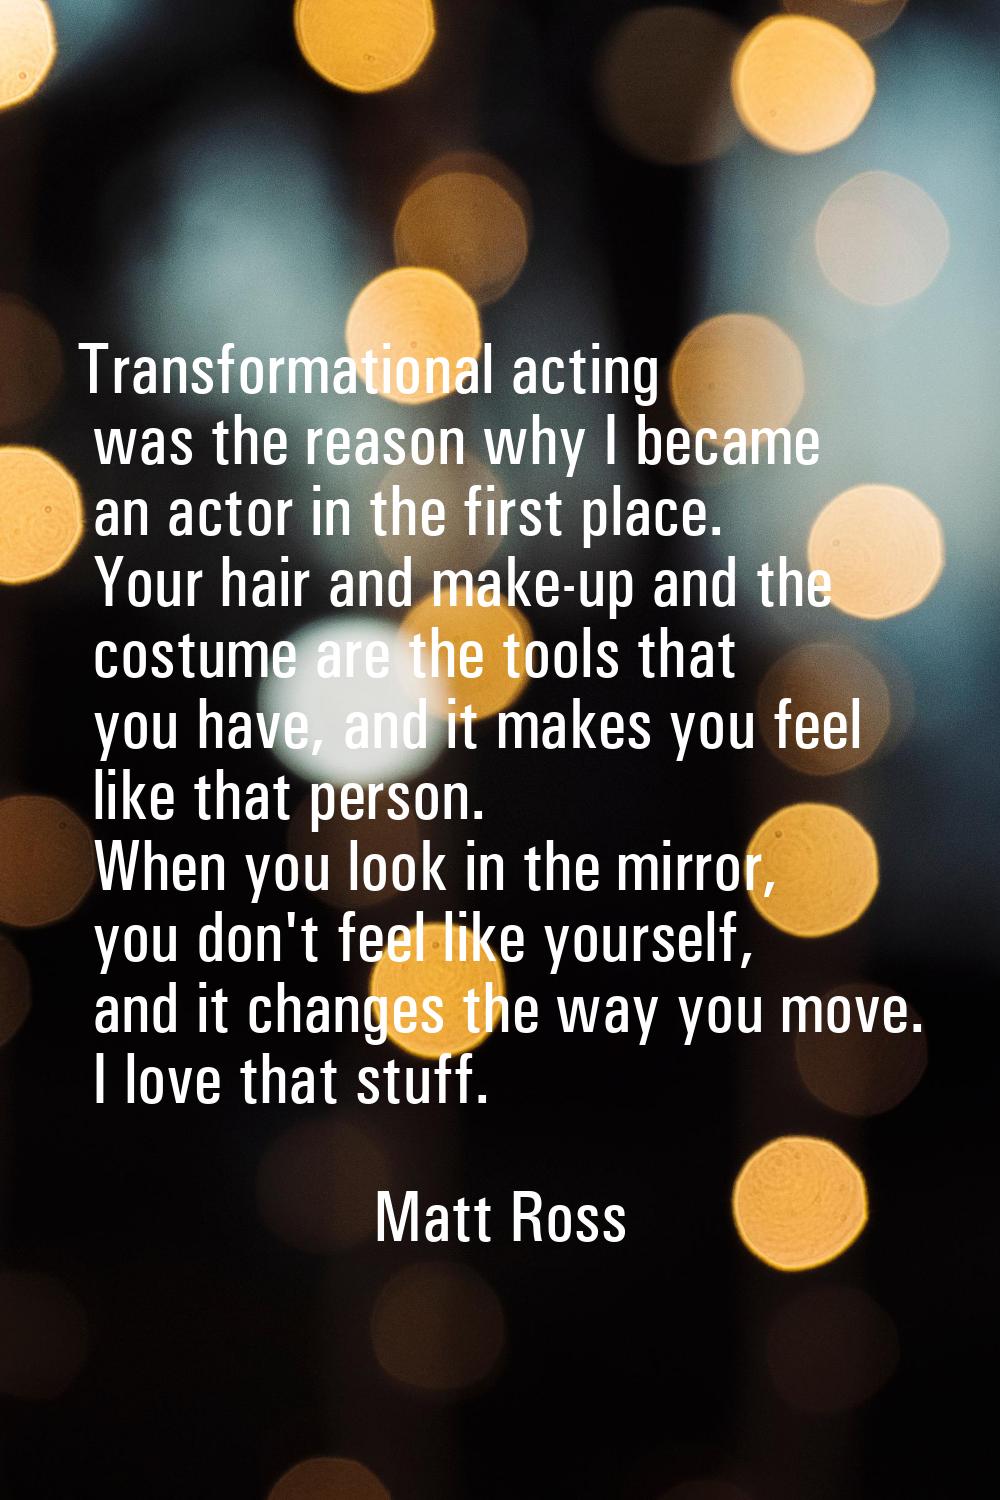 Transformational acting was the reason why I became an actor in the first place. Your hair and make